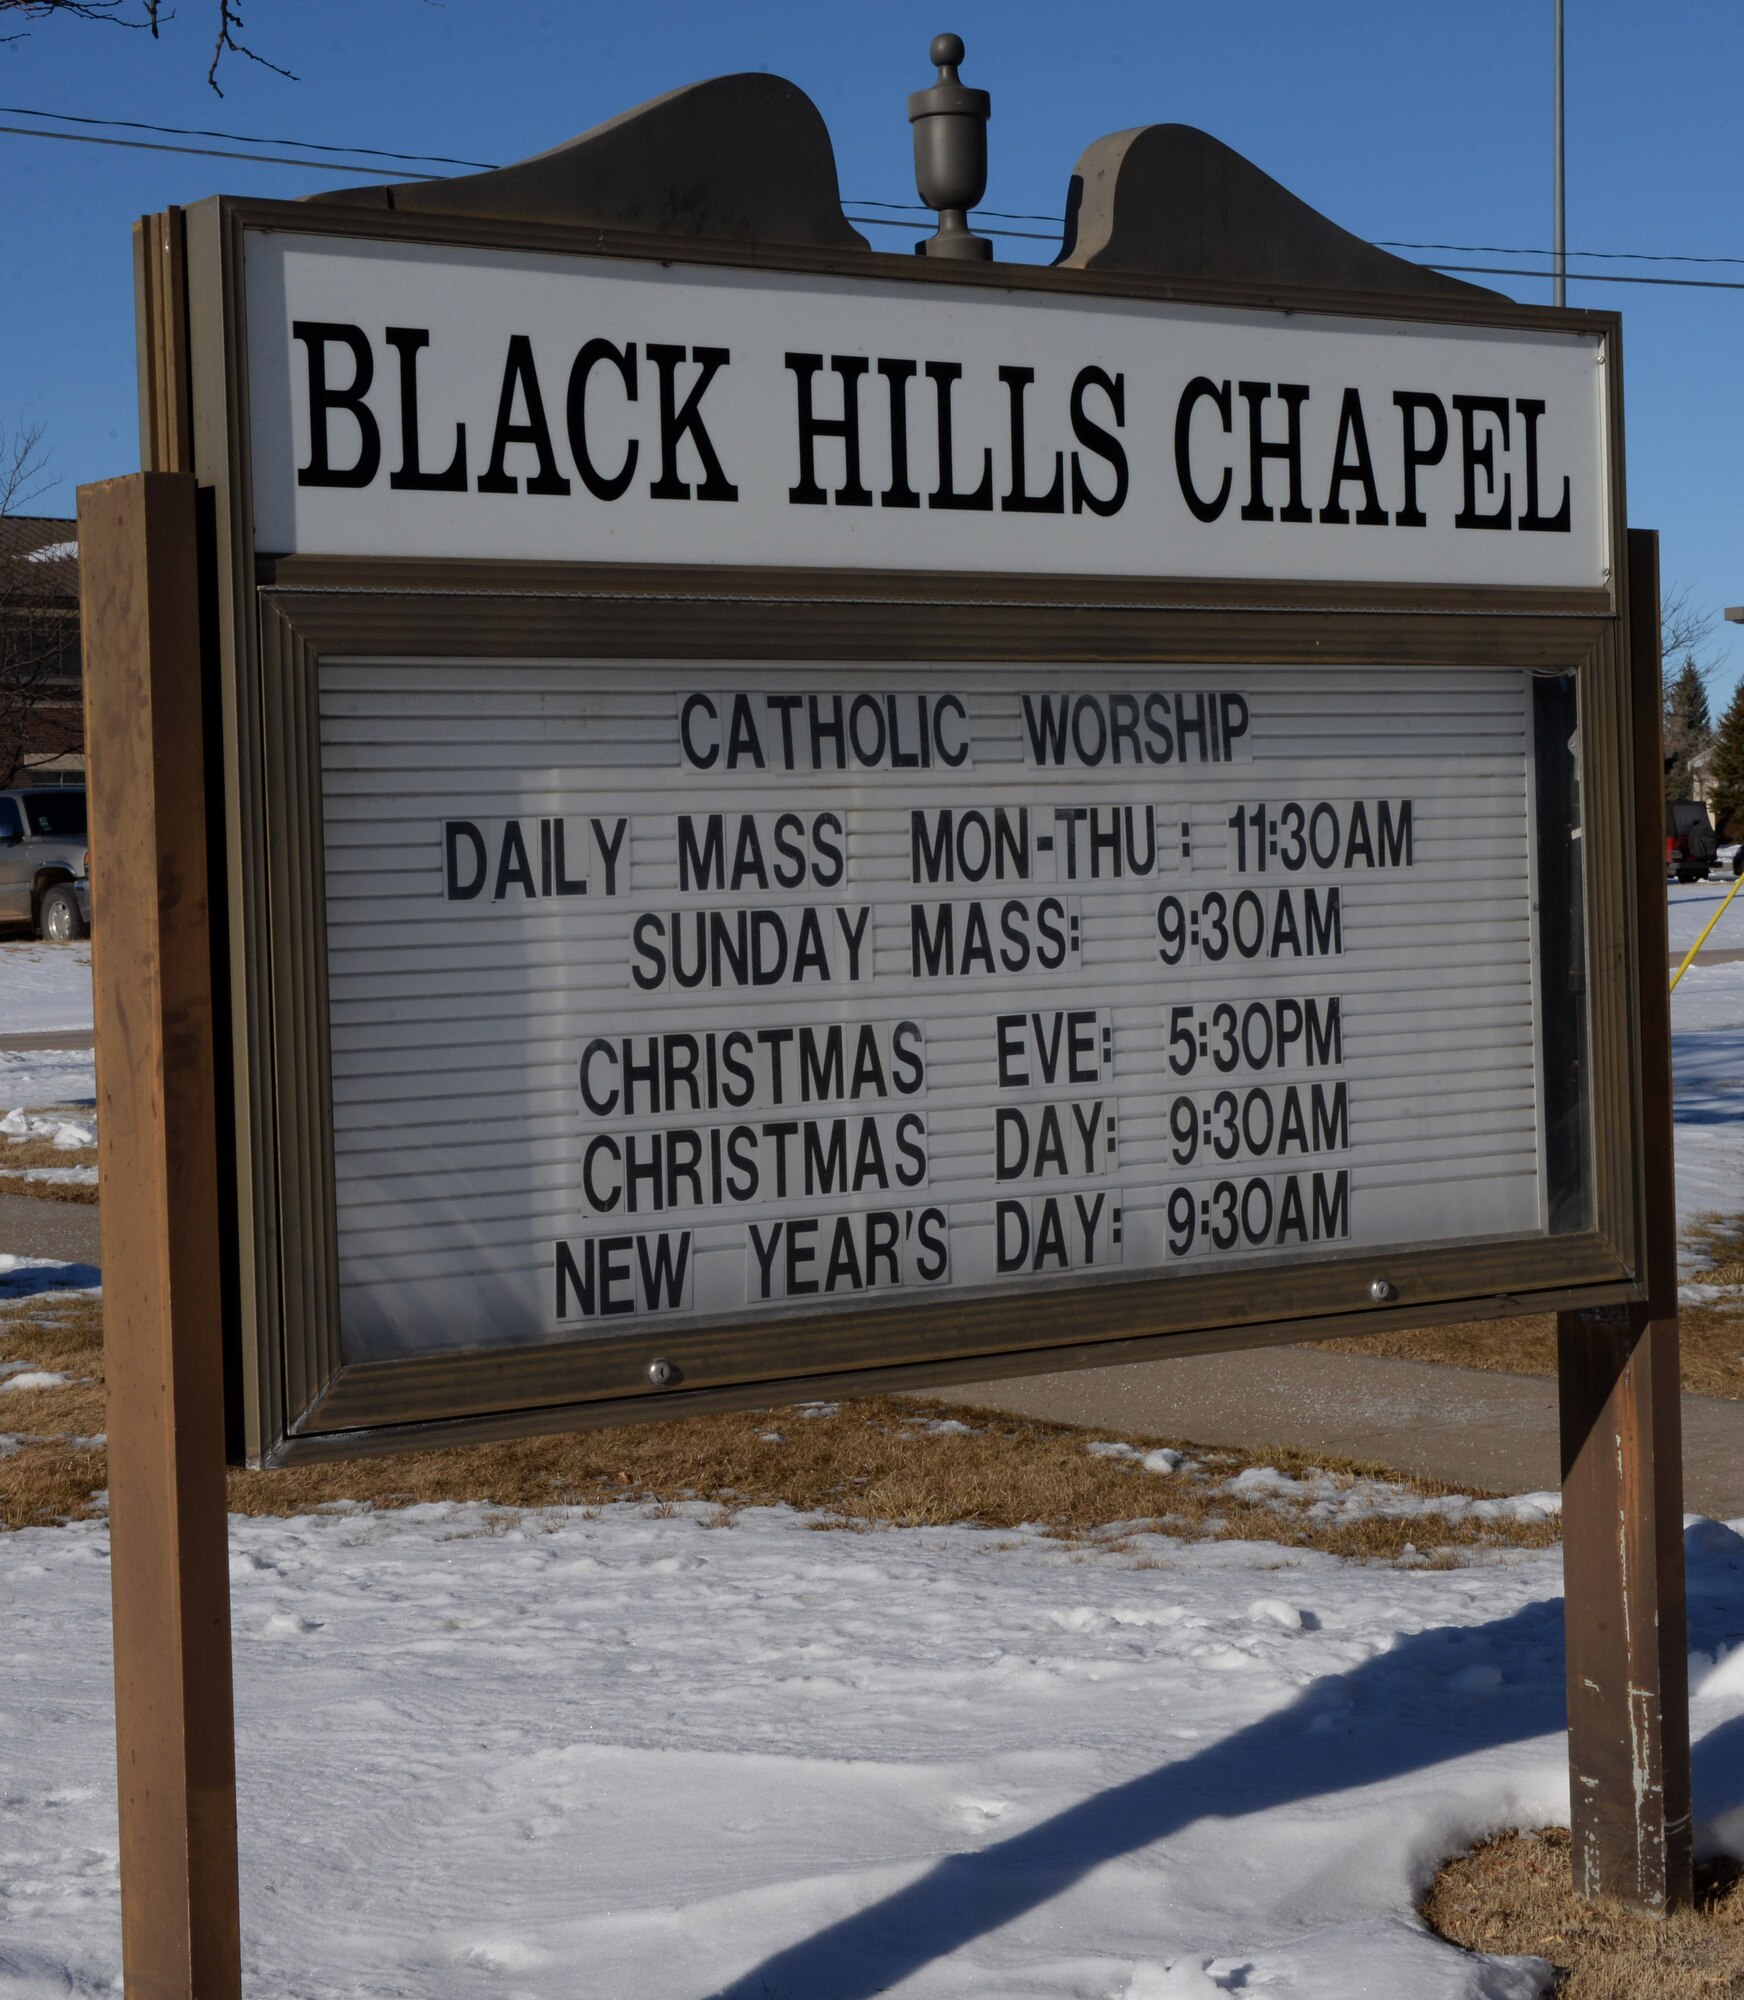 The Black Hills Chapel on Ellsworth Air Force Base, S.D., will be conducting Catholic mass during the holiday season Dec. 24 and 25, 2016. Christmas Eve mass is scheduled for 5:30 p.m., and Christmas Day mass is slated to begin at 9:30 a.m. (U.S. Air Force photo by Airman 1st Class Denise M. Jenson)